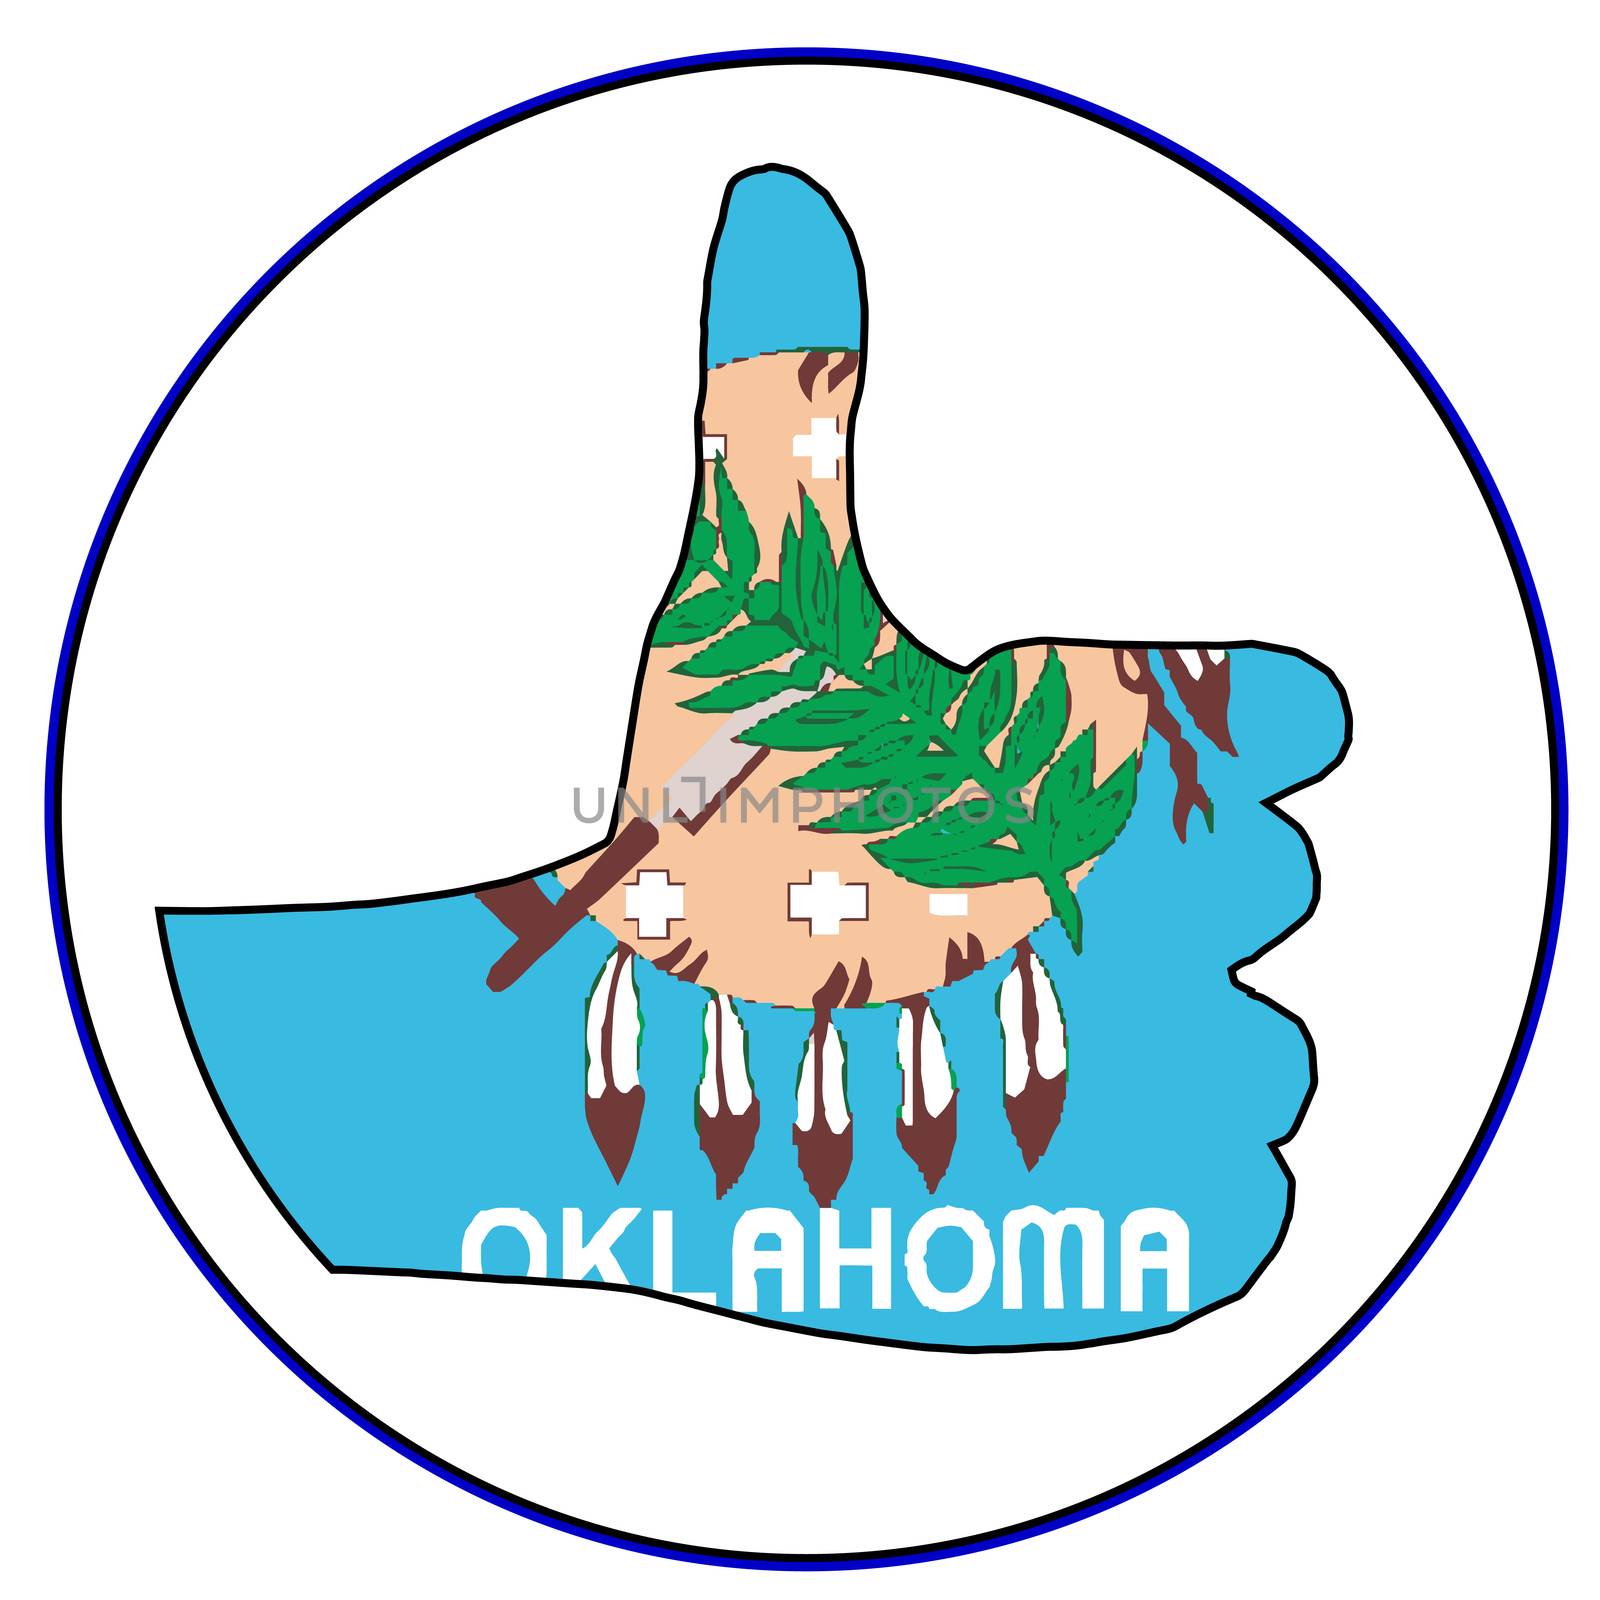 Oklahoma Flag hand giving the thumbs up sign all over a white background